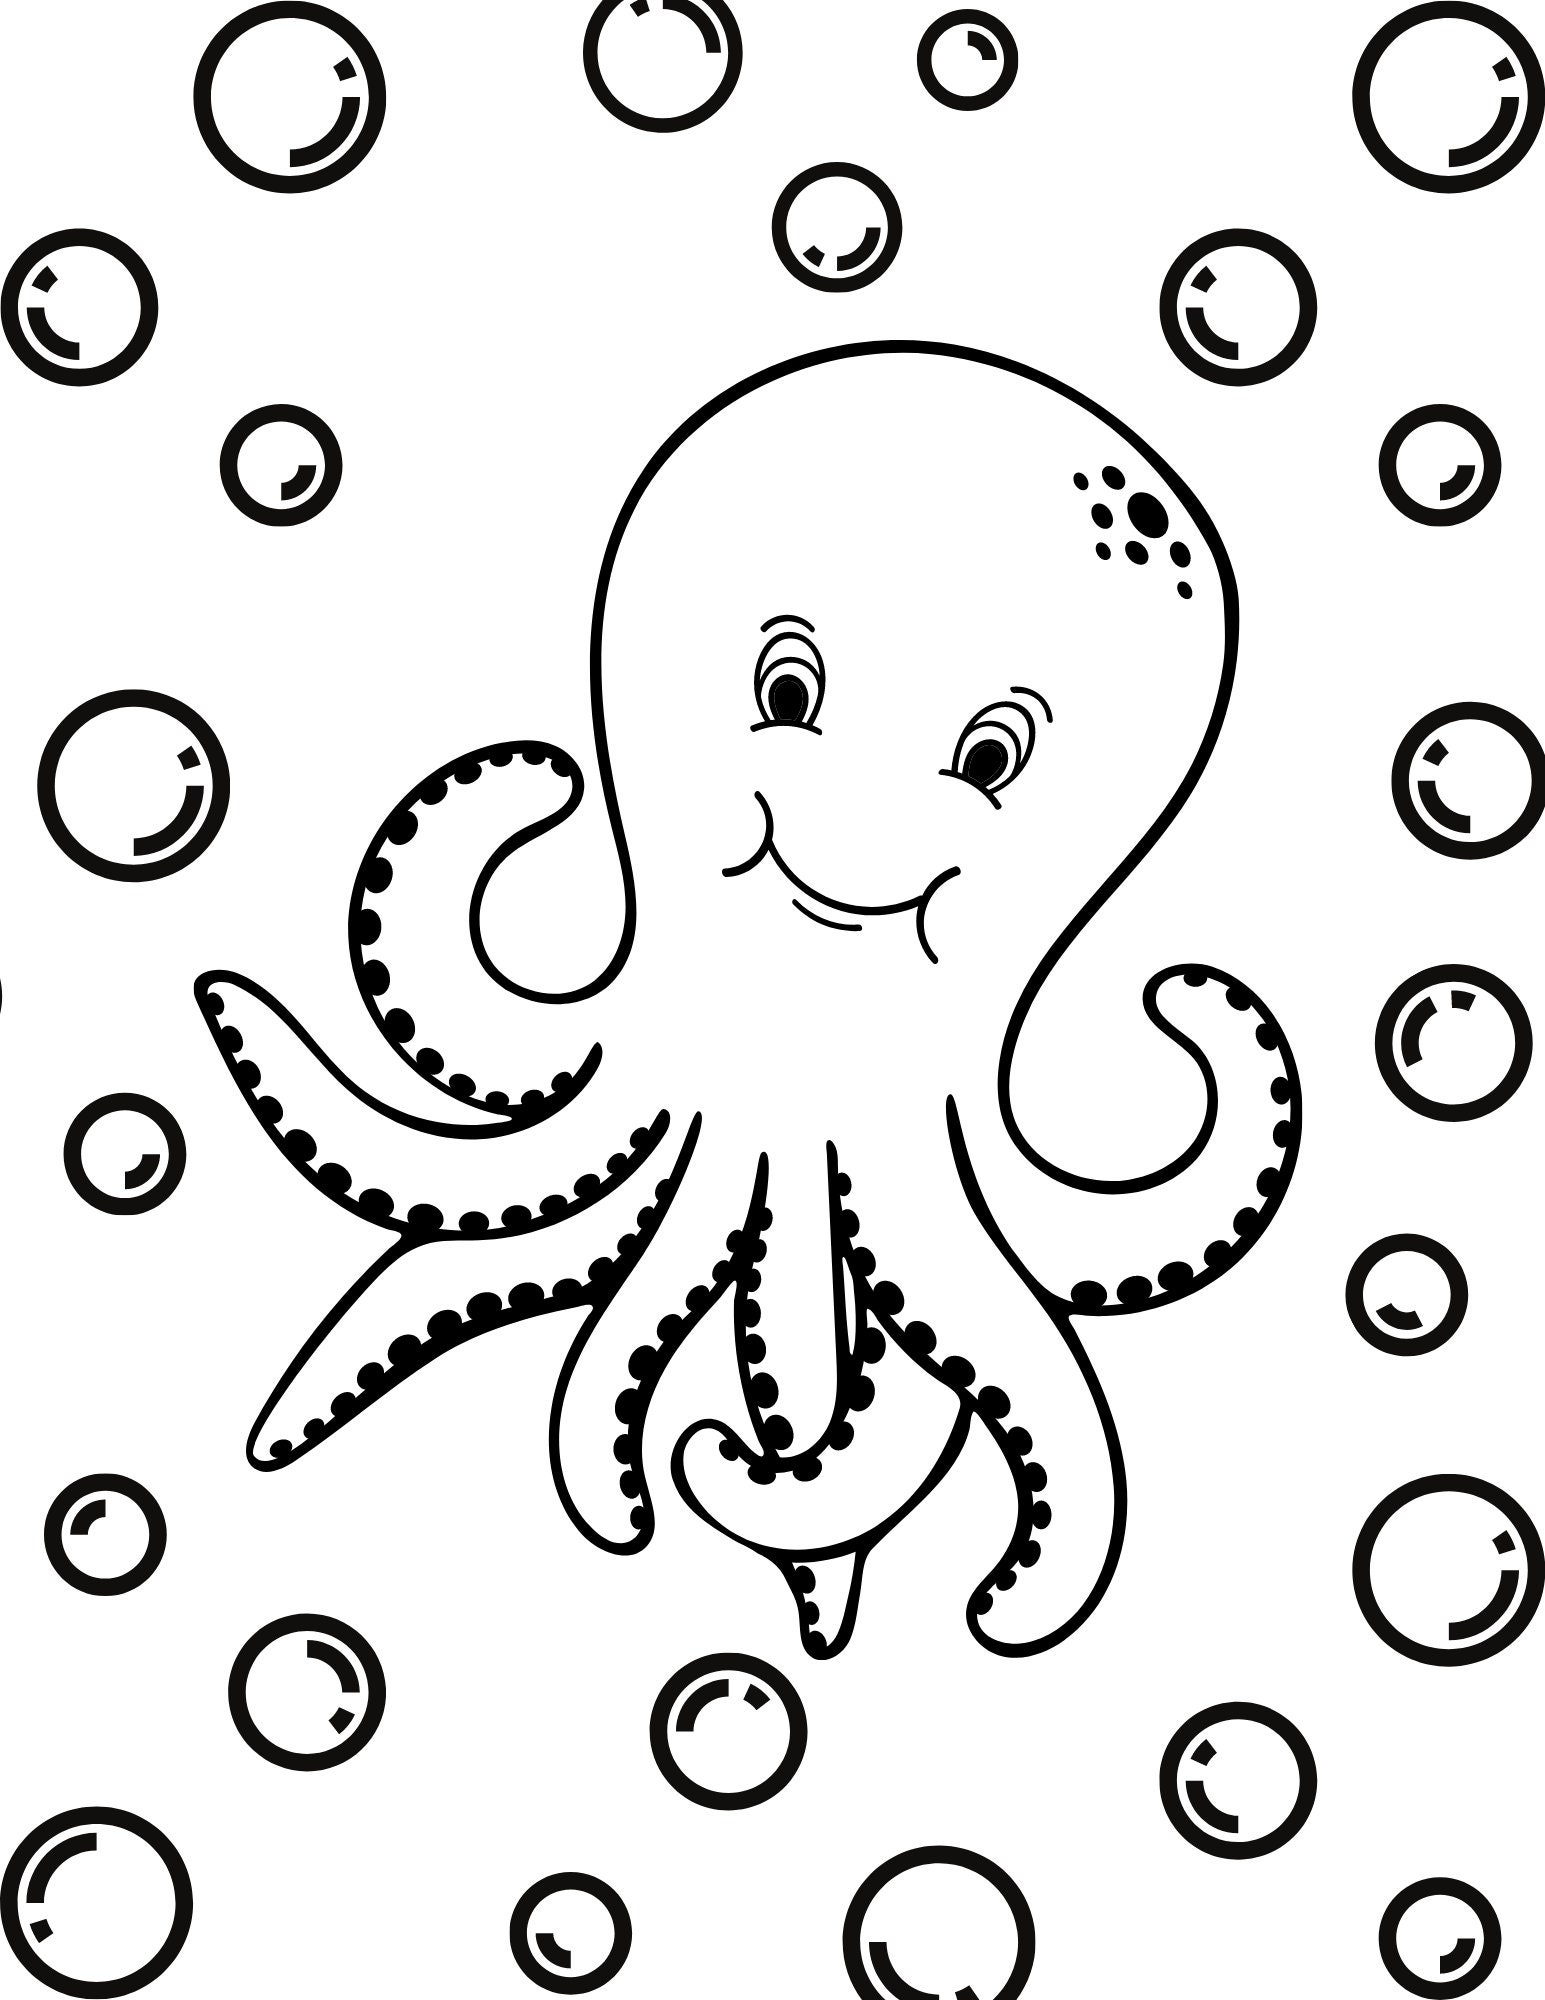 Sea Animal coloring pages for kids | Etsy